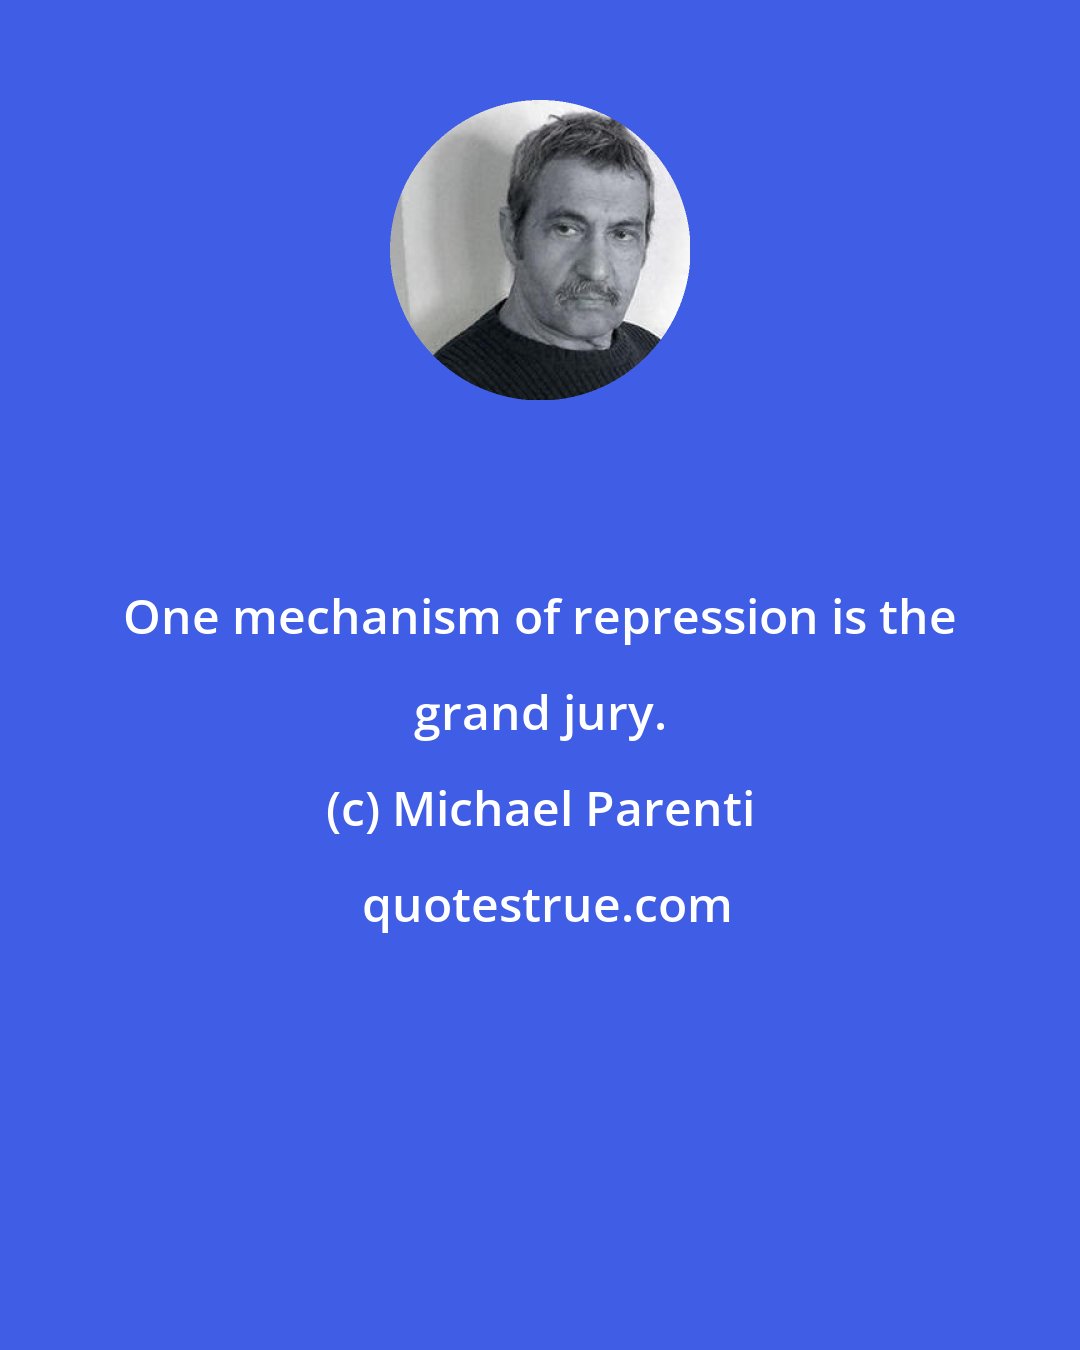 Michael Parenti: One mechanism of repression is the grand jury.